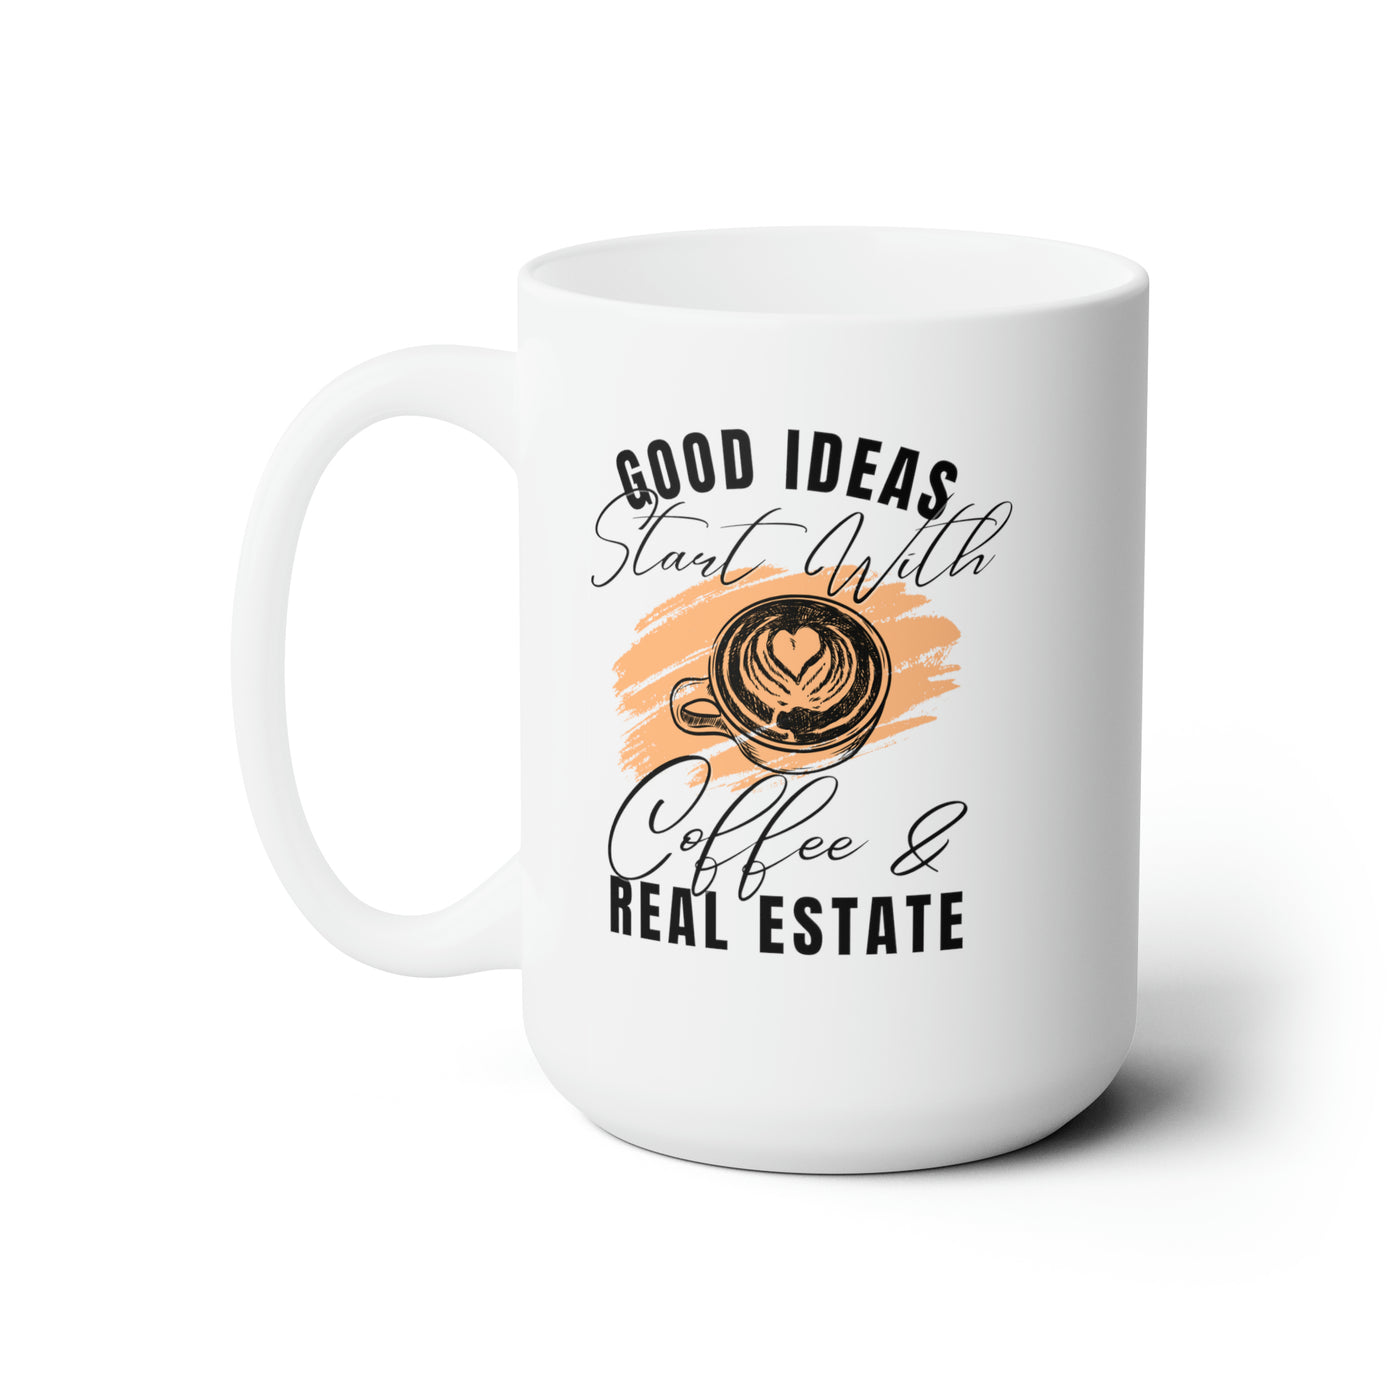 Good Ideas start with coffee and real estate